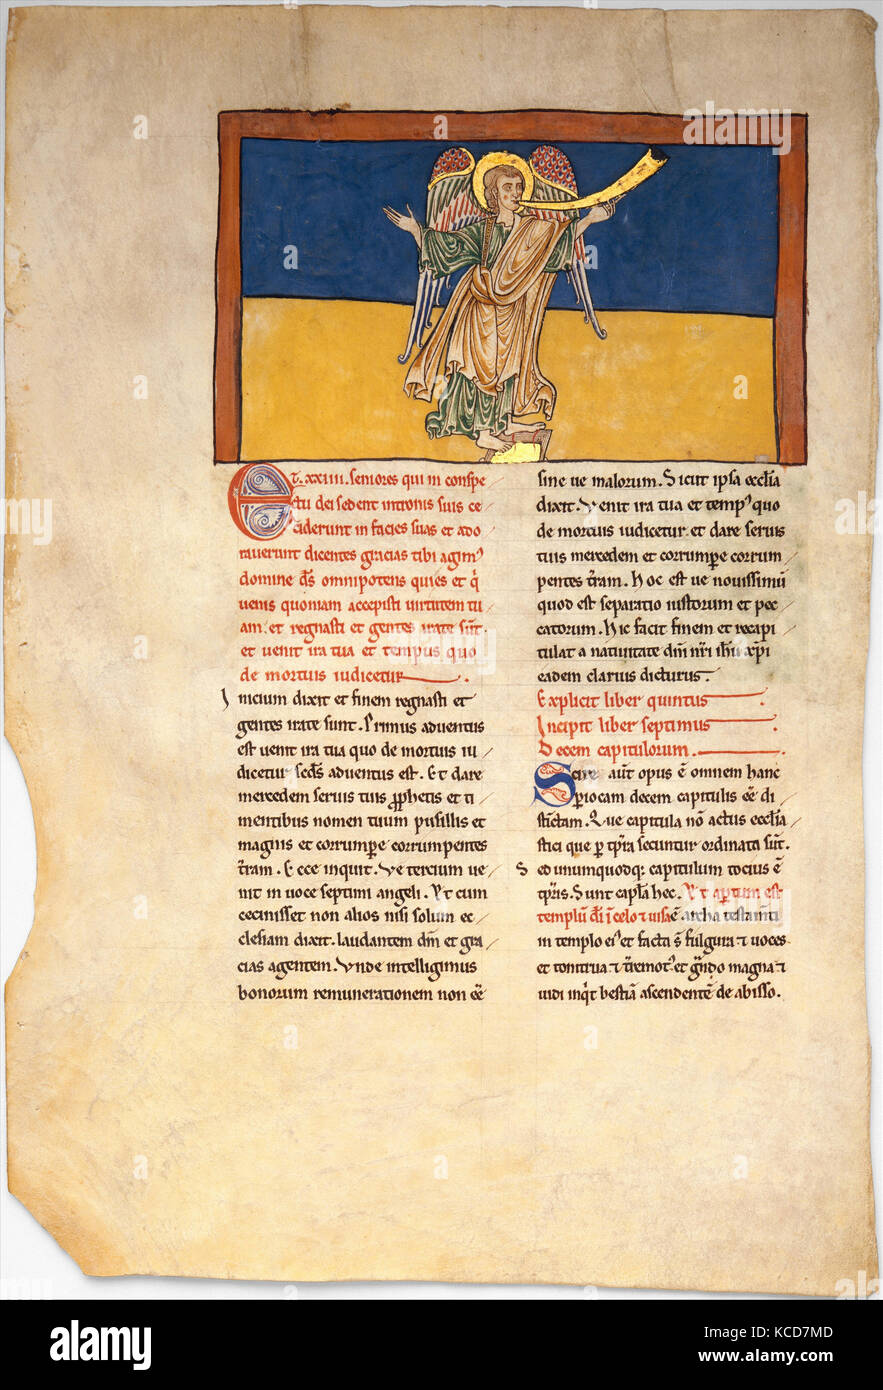 Leaf from a Beatus Manuscript: the Seventh Angel Proclaims the Reign of the Lord, ca. 1180 Stock Photo